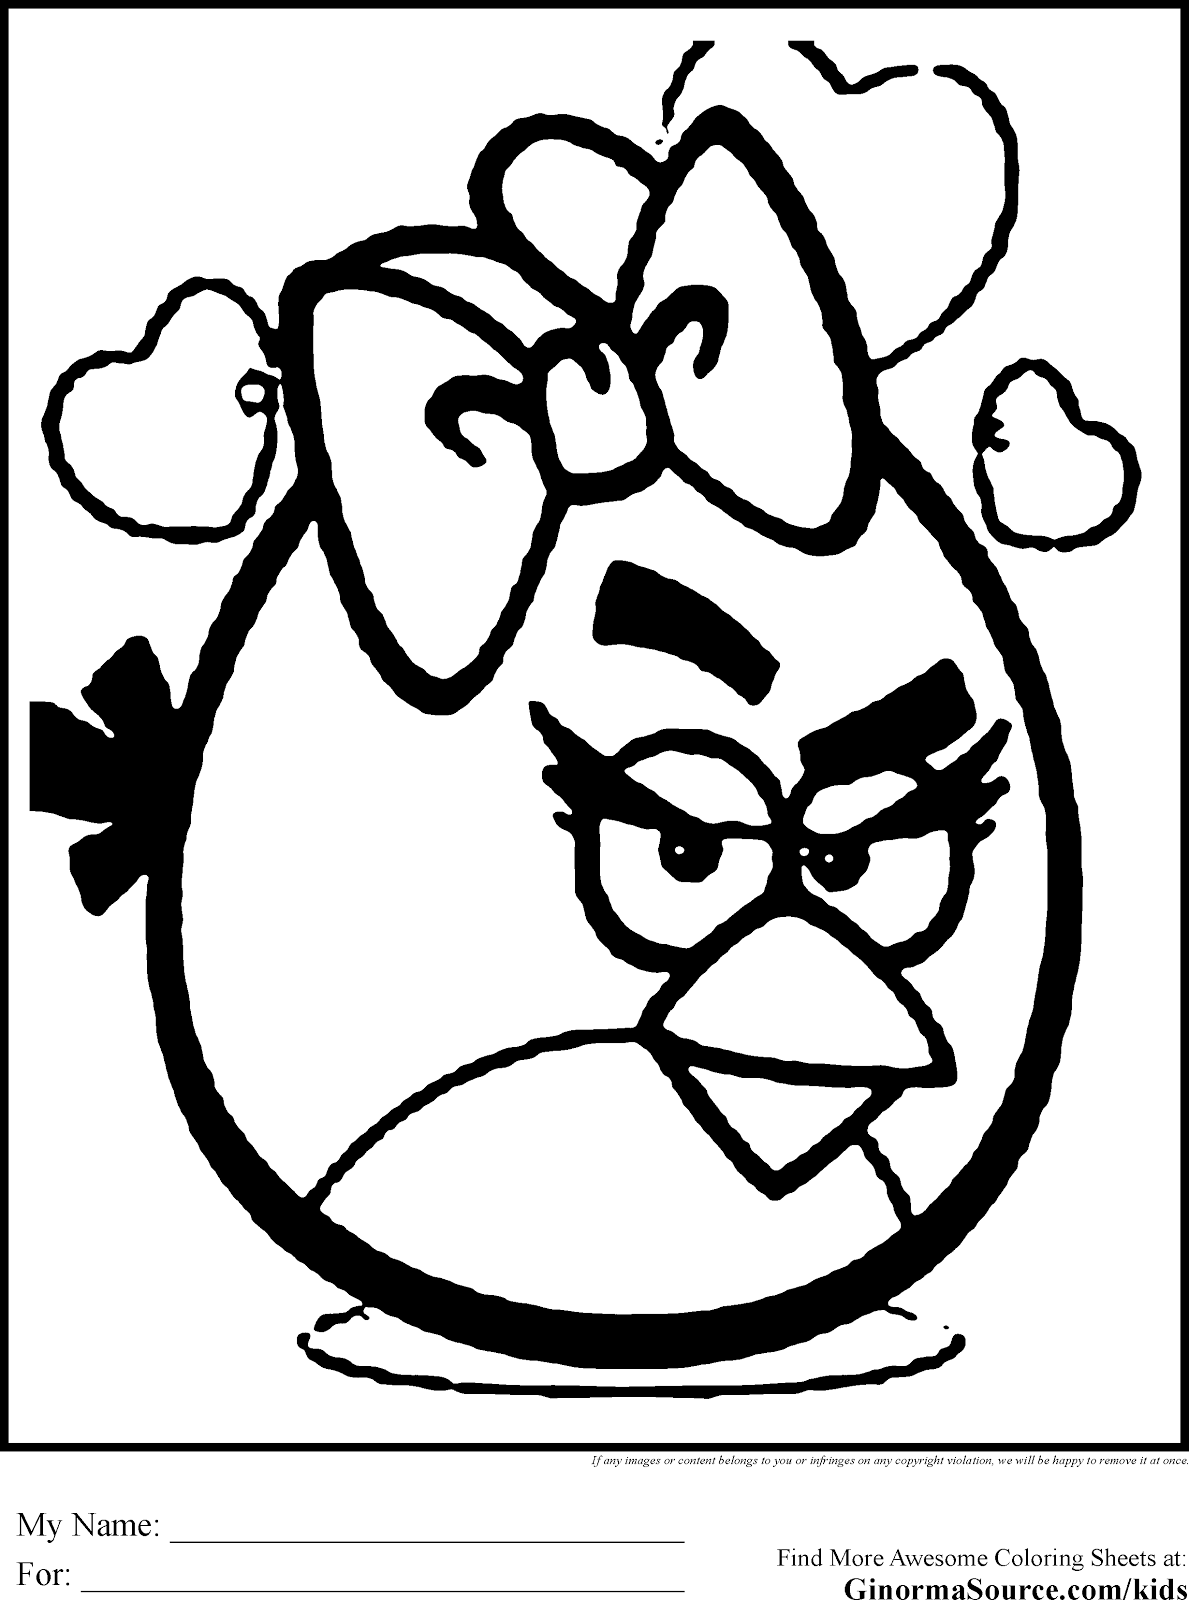 Download Unique Comics Animation: most useful angry birds coloring pages